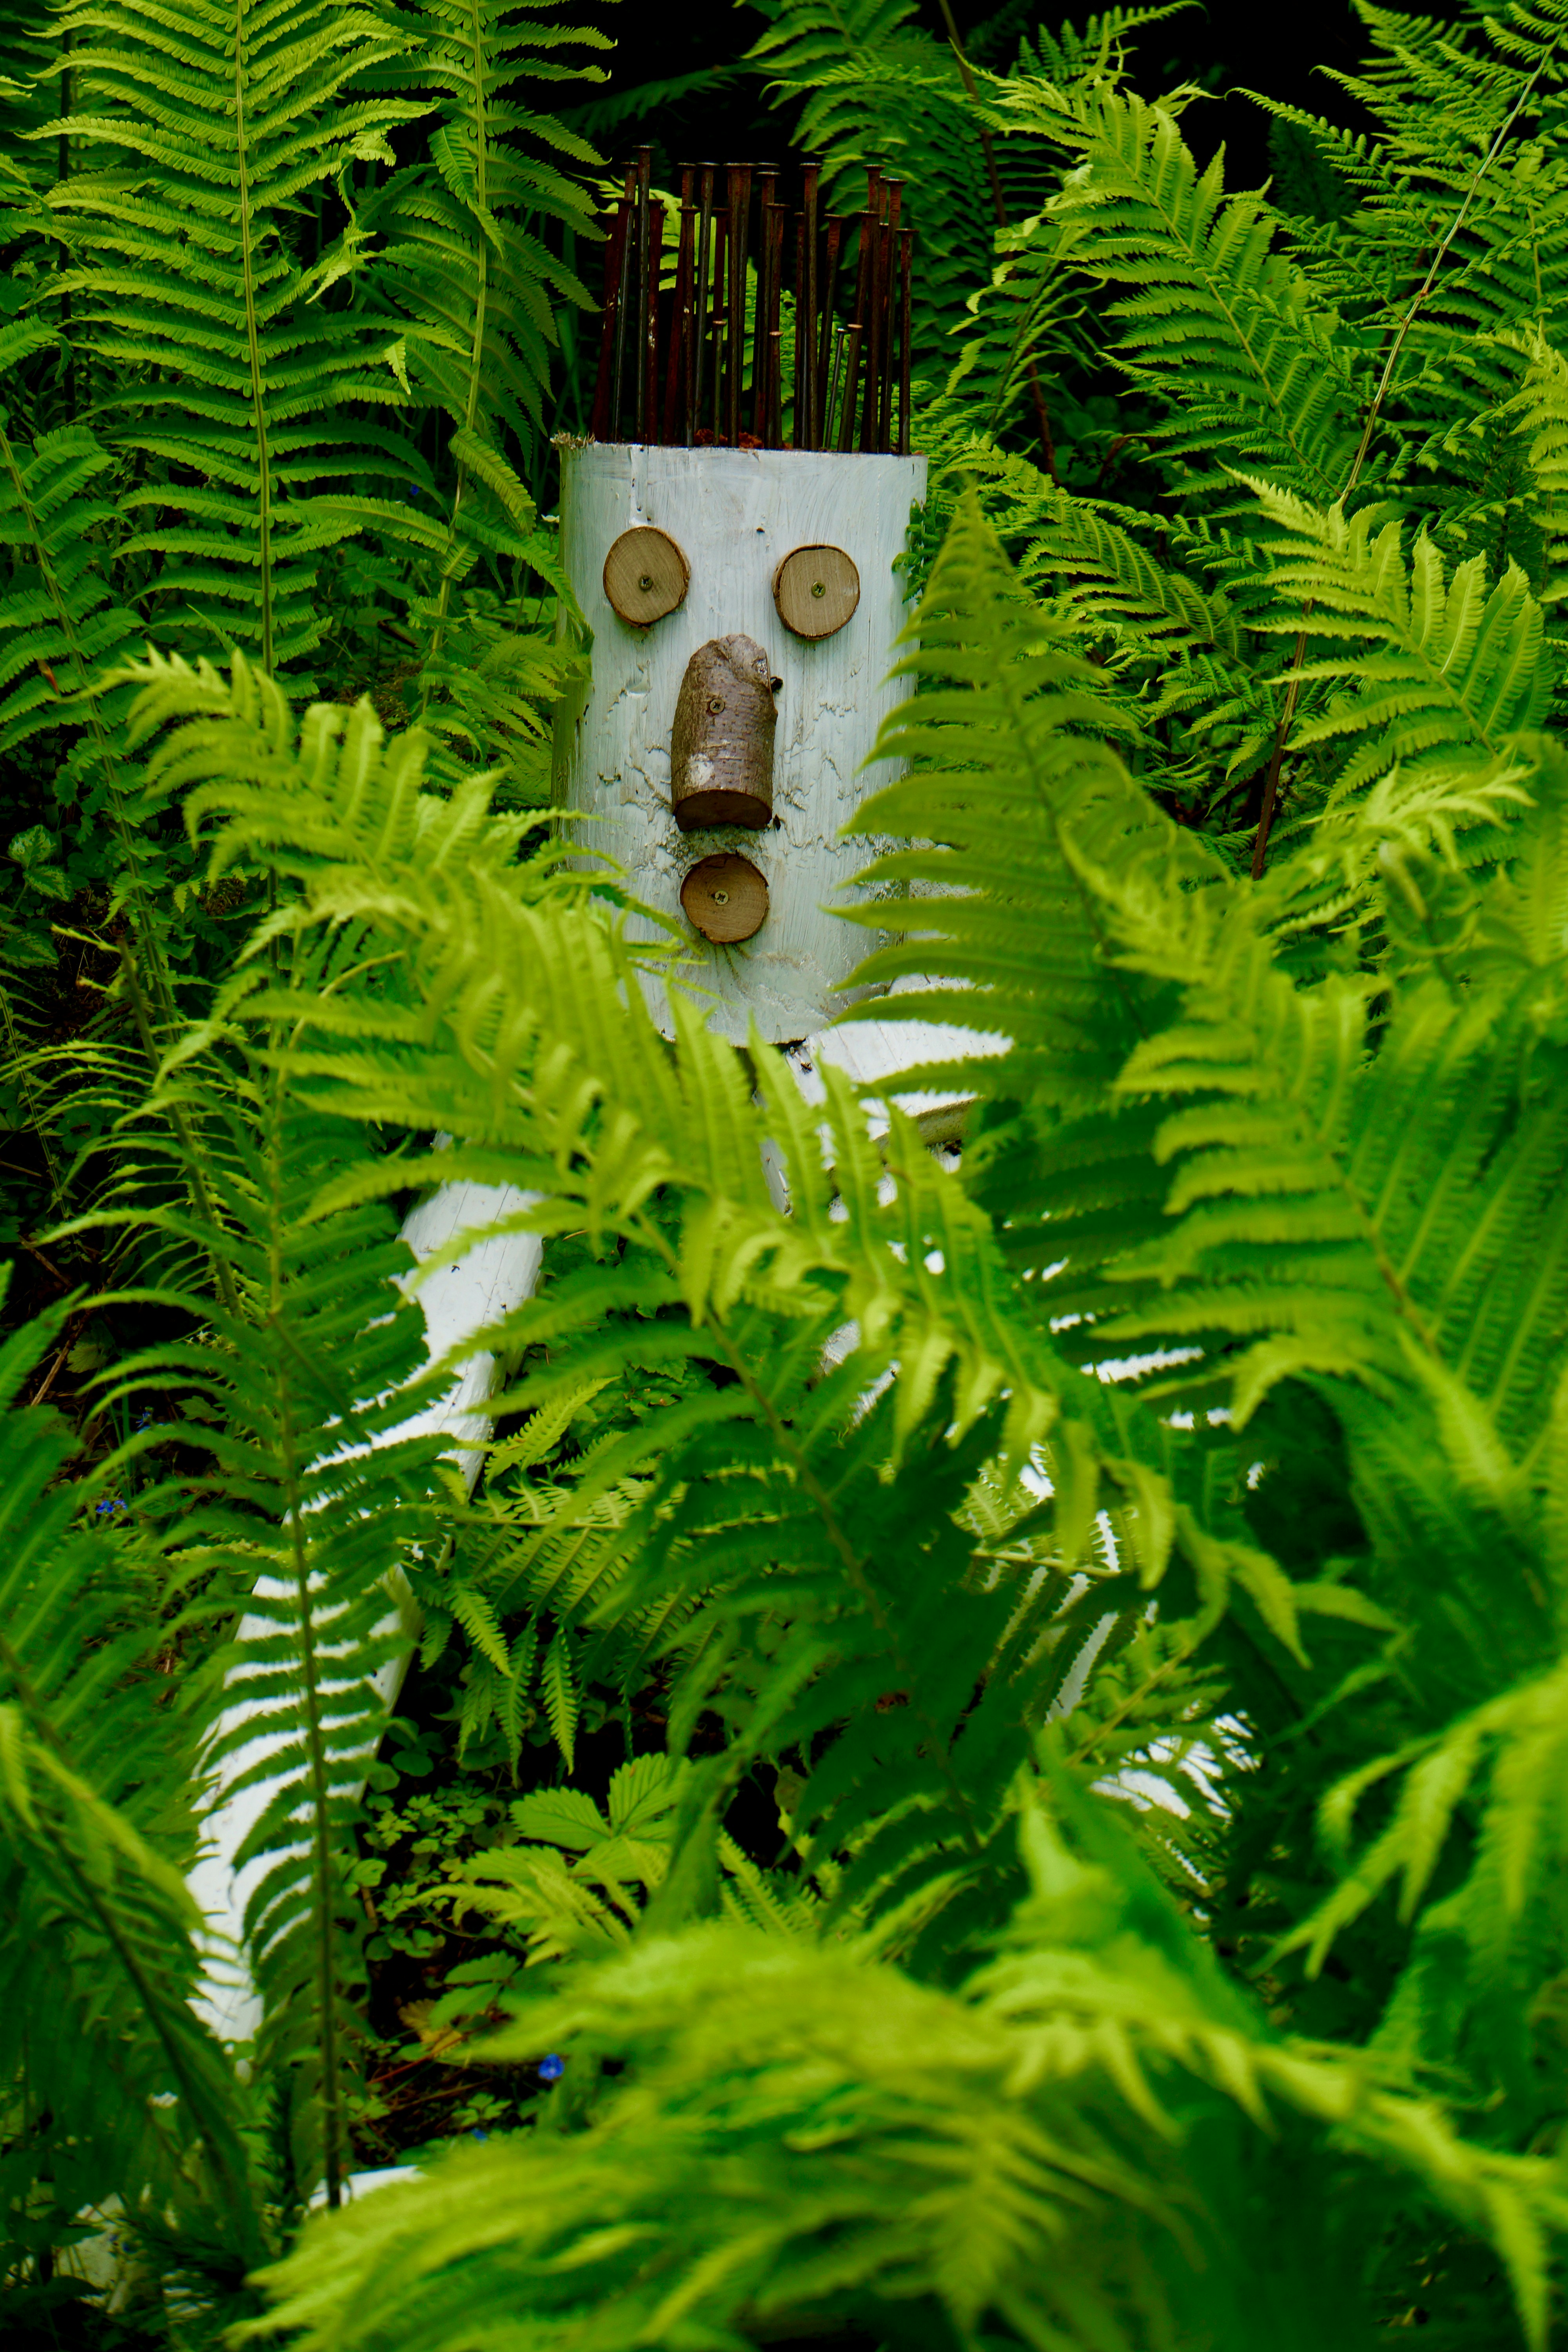 white and brown wooden house ornament on green fern plant